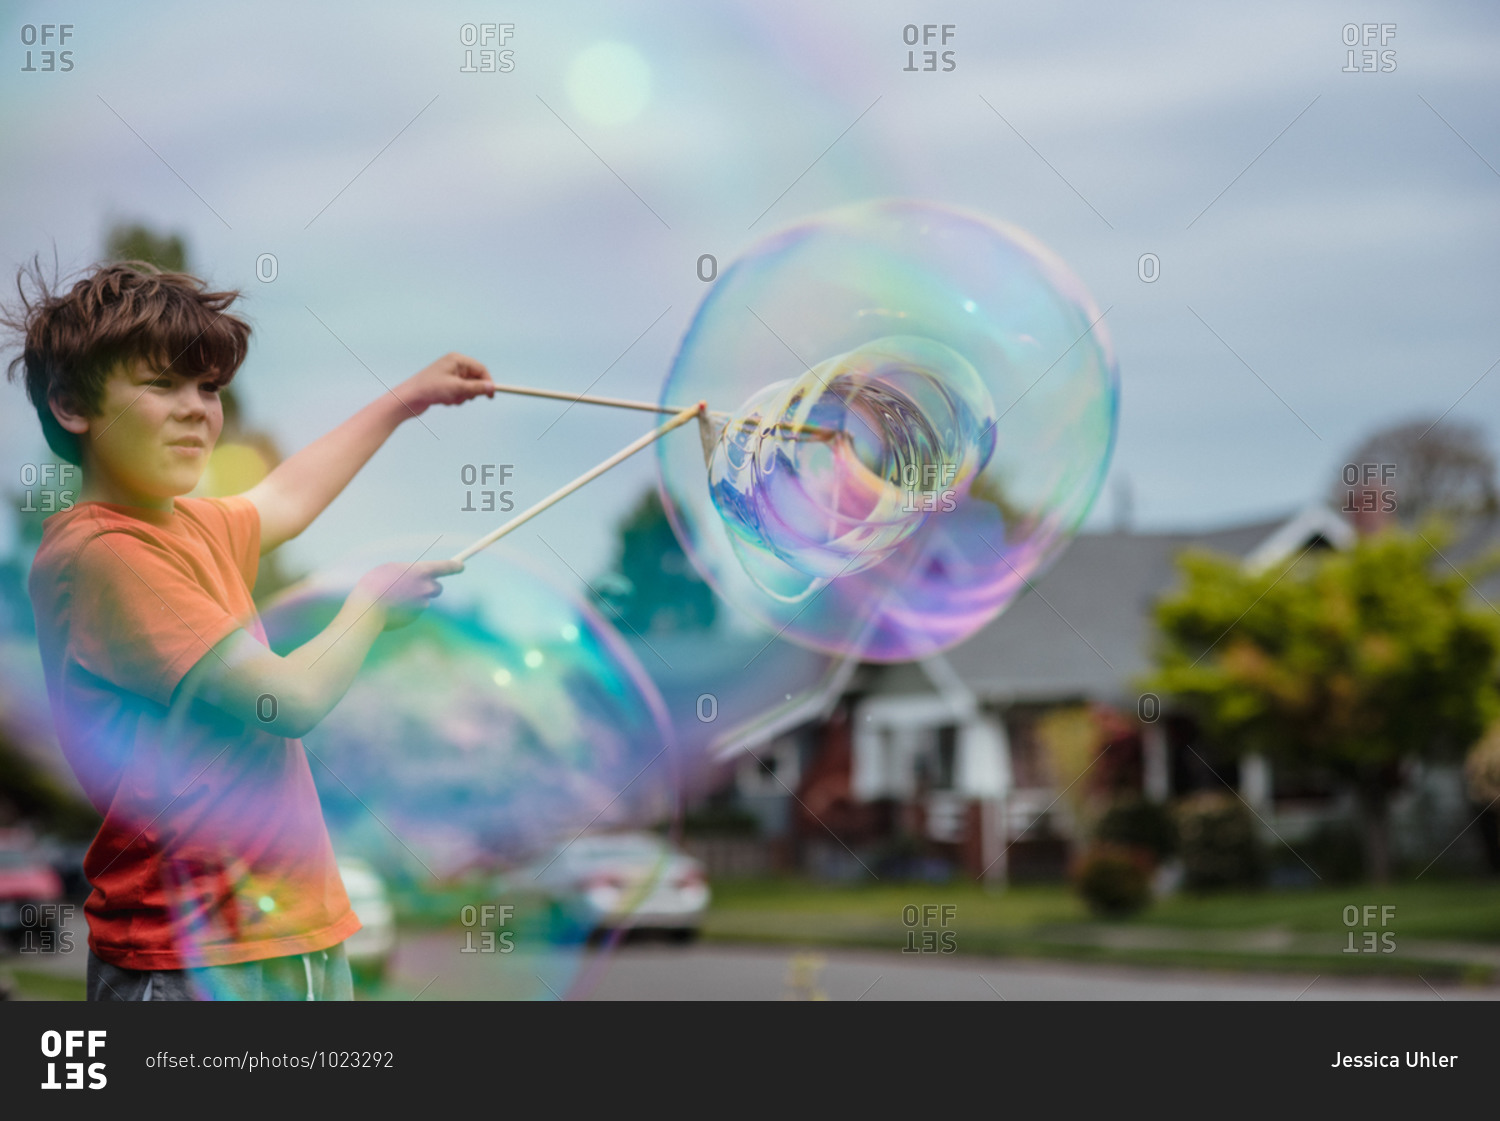 Young boy playing with a large bubble wand in front yard